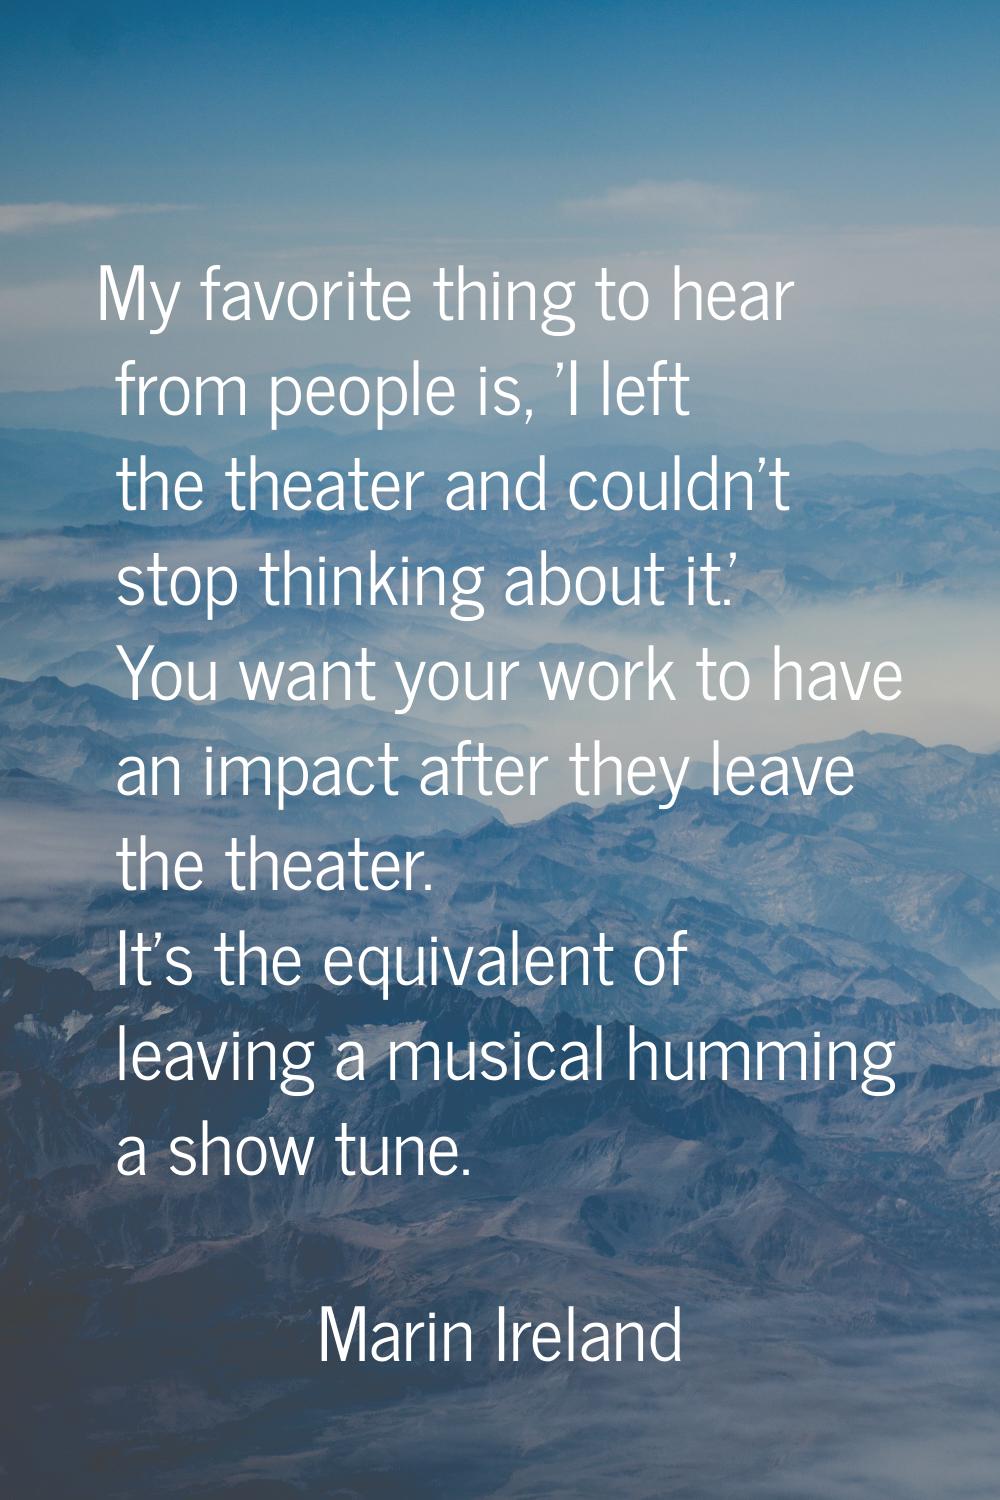 My favorite thing to hear from people is, 'I left the theater and couldn't stop thinking about it.'